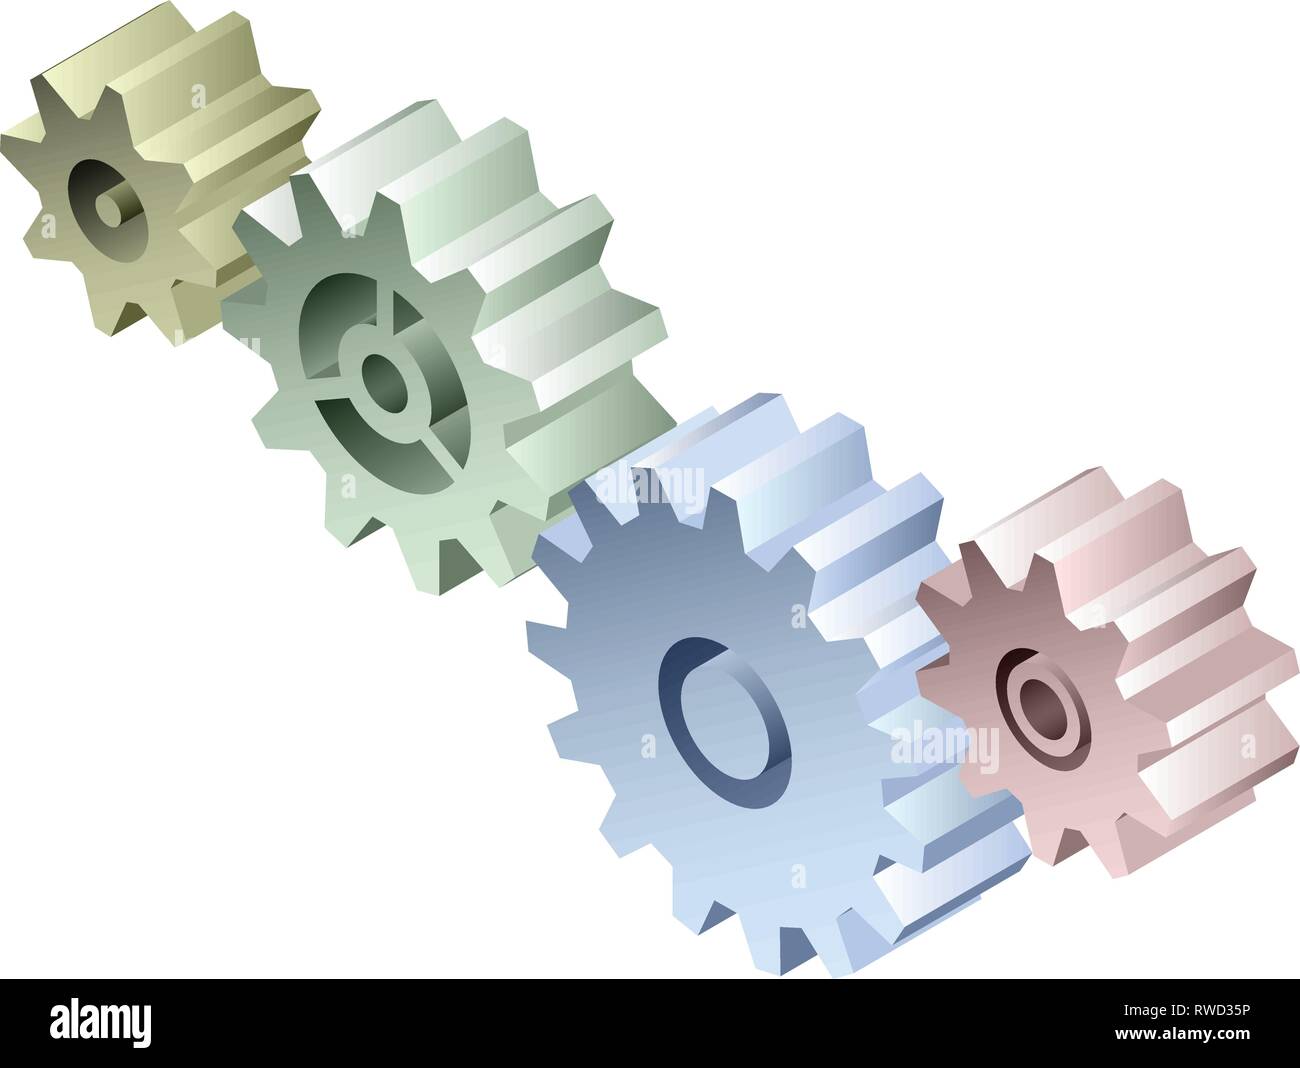 Group of connected gears vector illustration Stock Vector